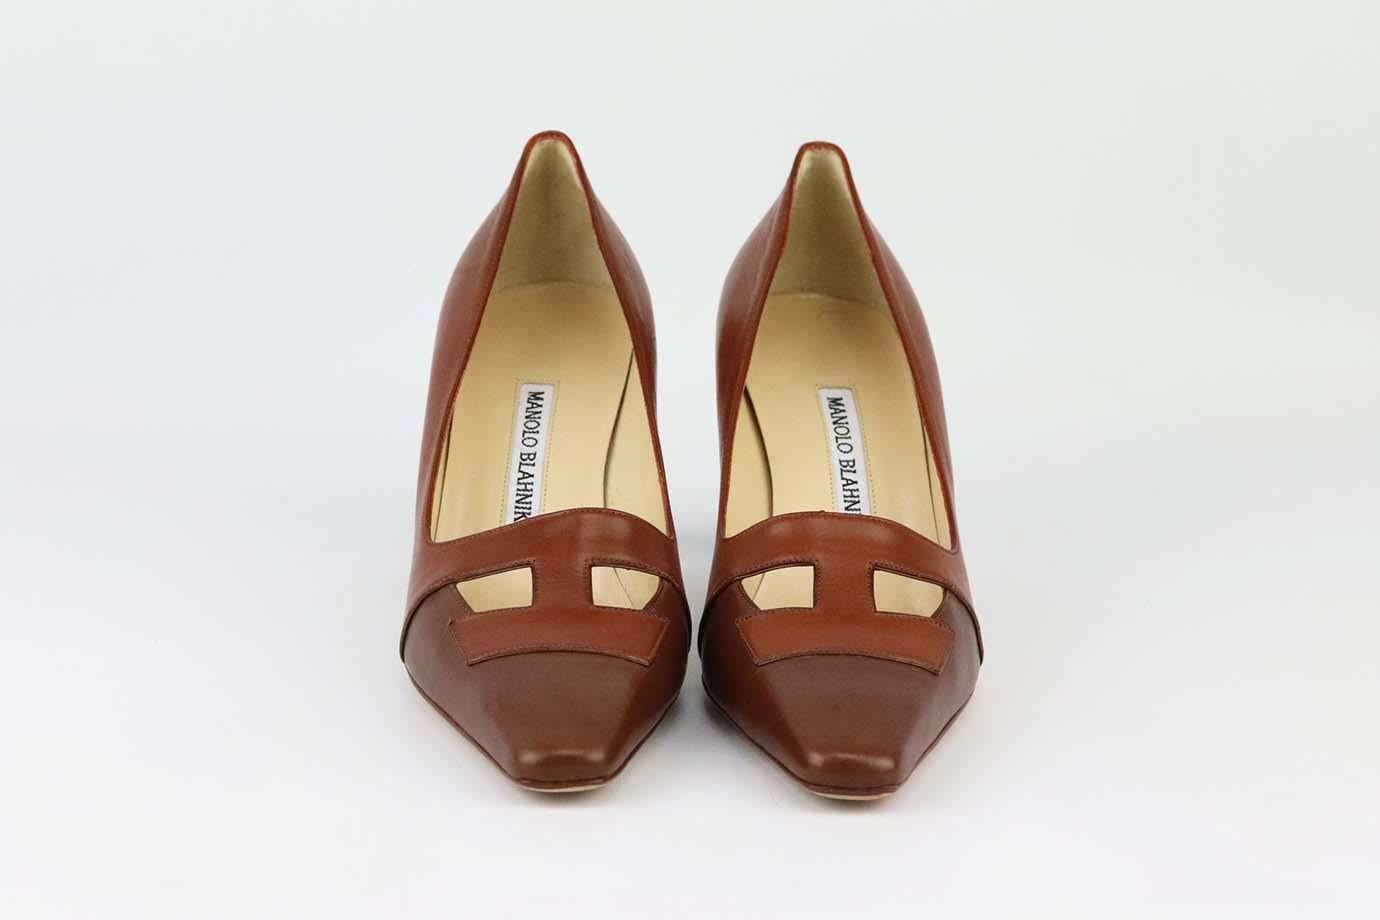 These pumps by Manolo Blahnik are a classic style that will never date, made in Italy from supple brown leather, they have square toes, cutout detail and comfortable 63mm heels to take you from morning meetings to dinner with friends. Heel measures